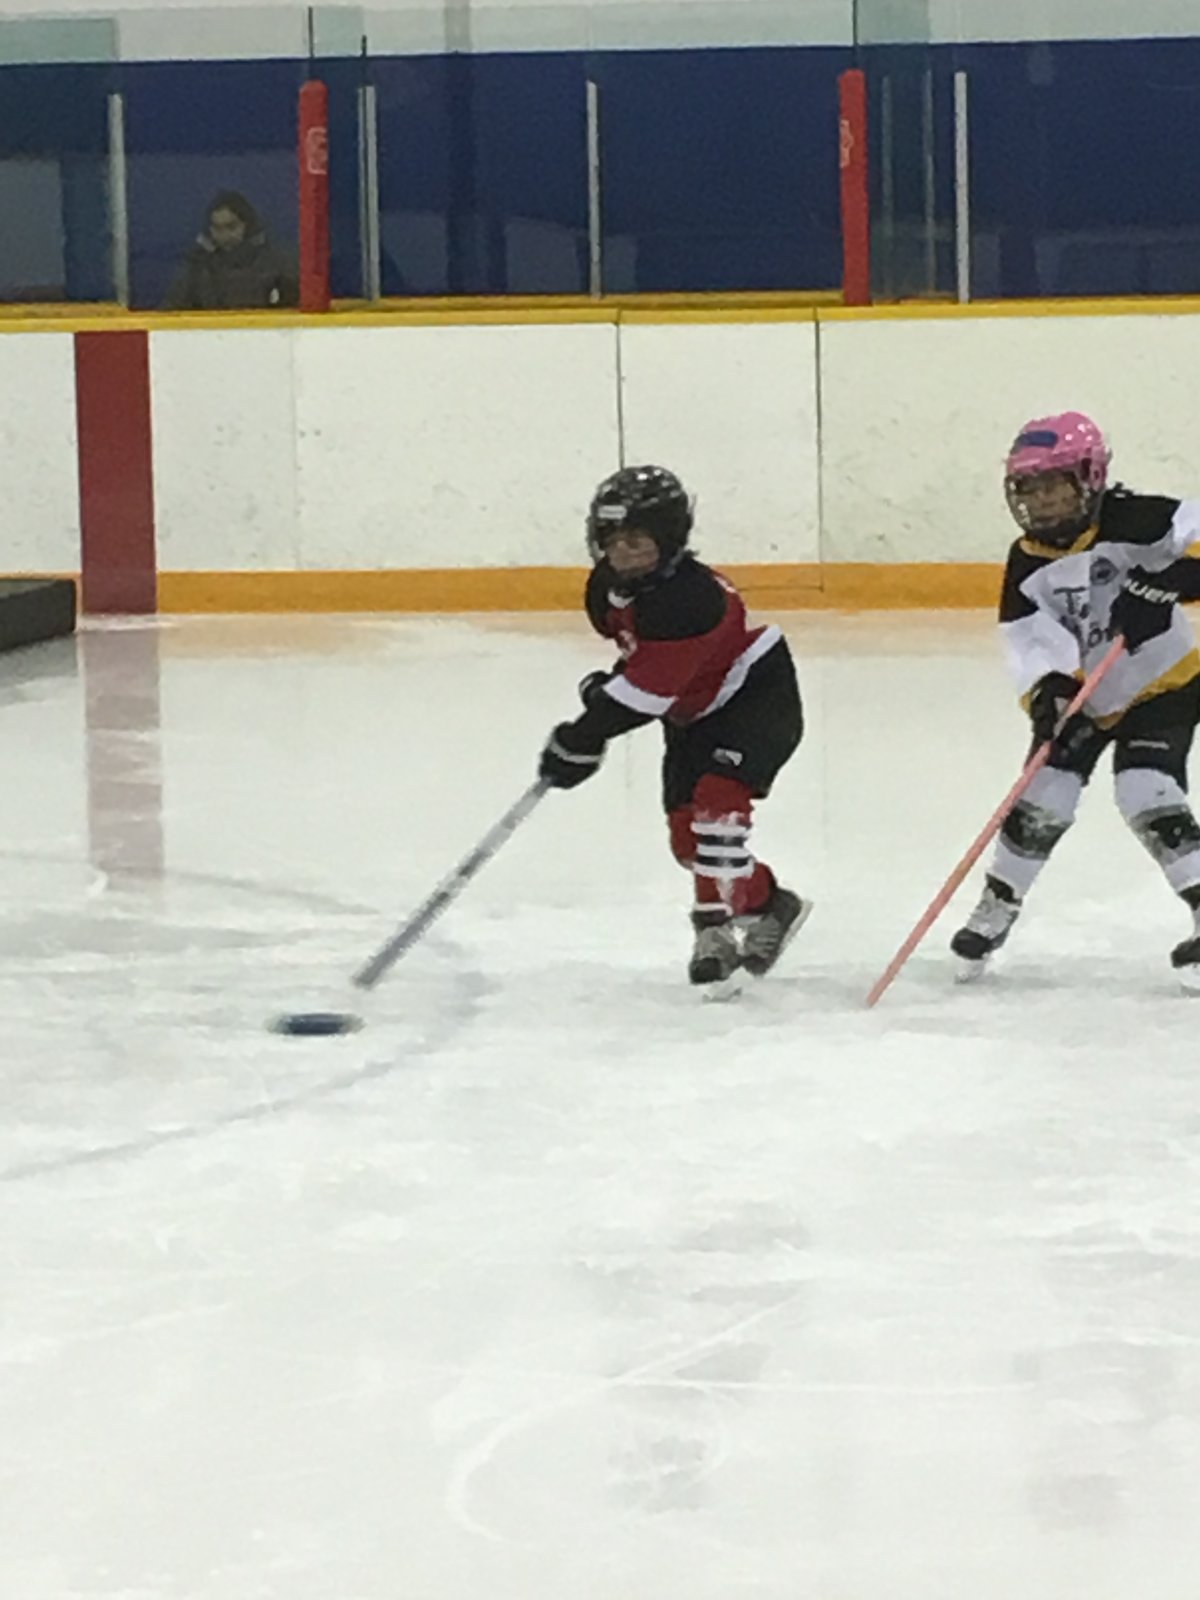 Come try ringette - image